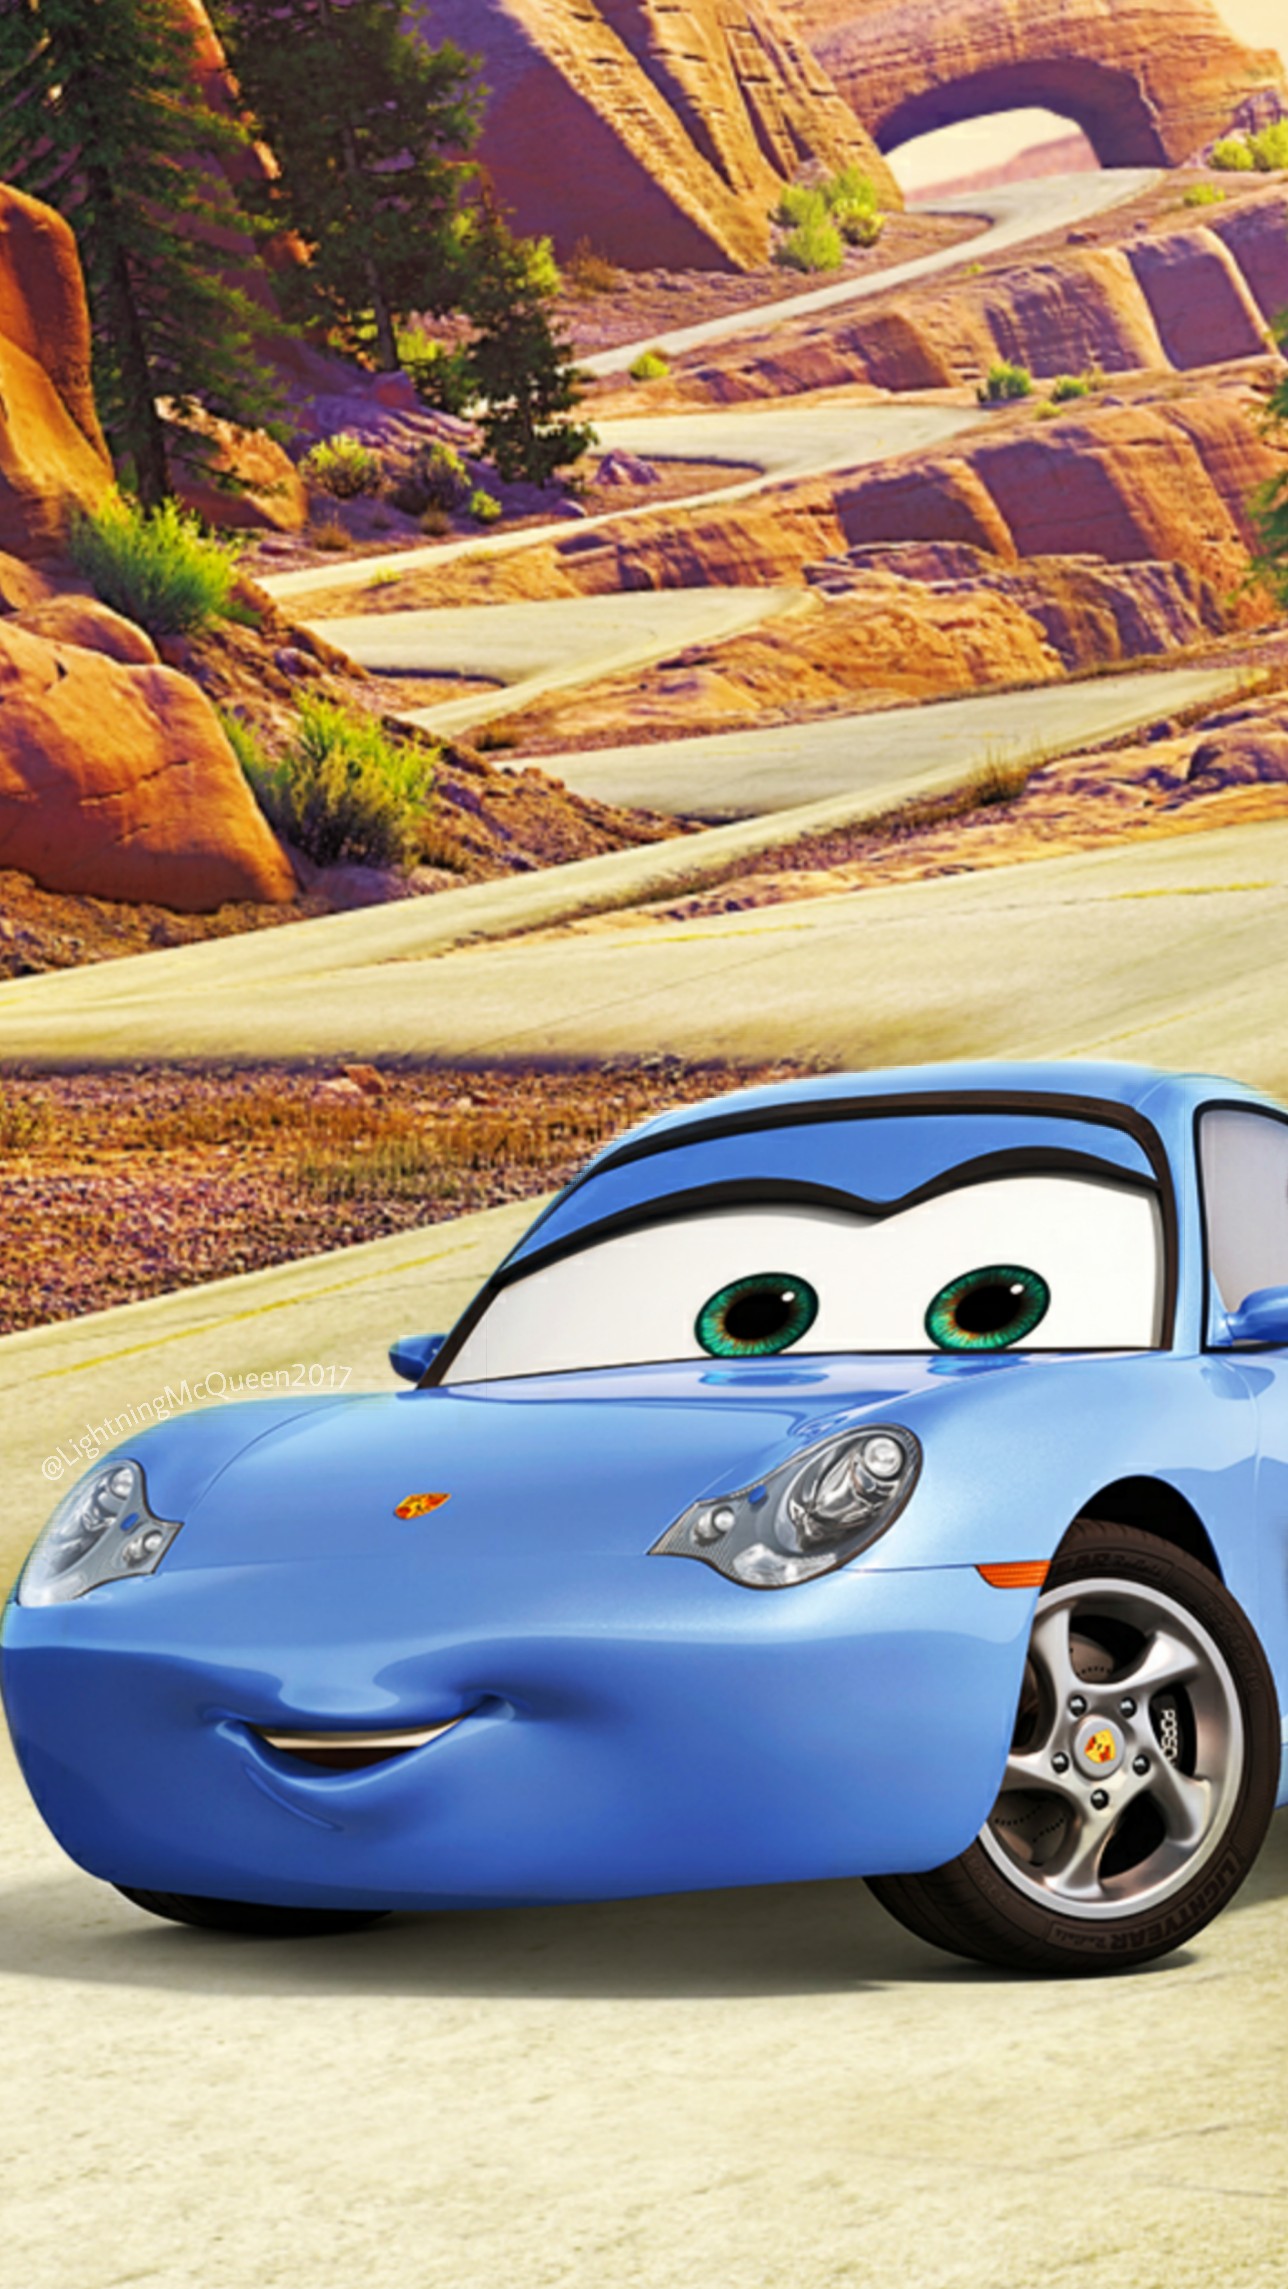 Cars 3 Mater watches Lightning Mcqueen crash. by sgtjack2016 on DeviantArt